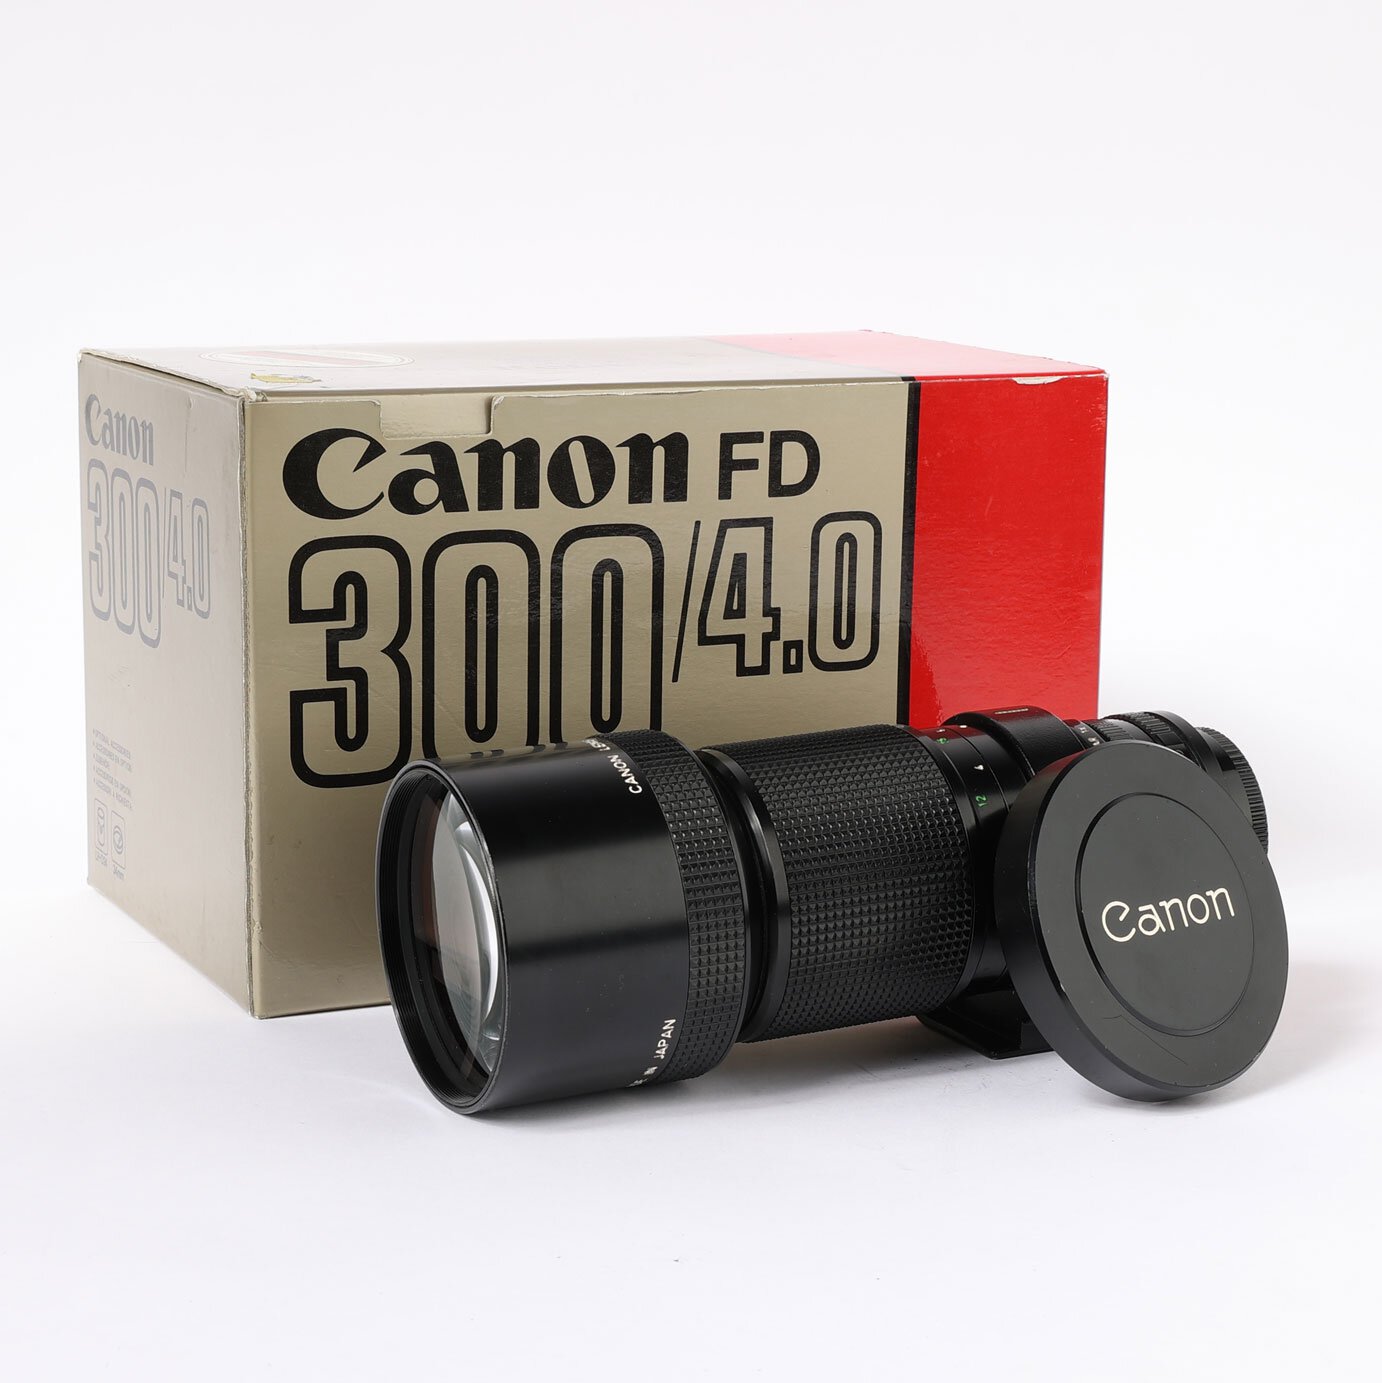 Canon Lens FD 300mm 4 IF